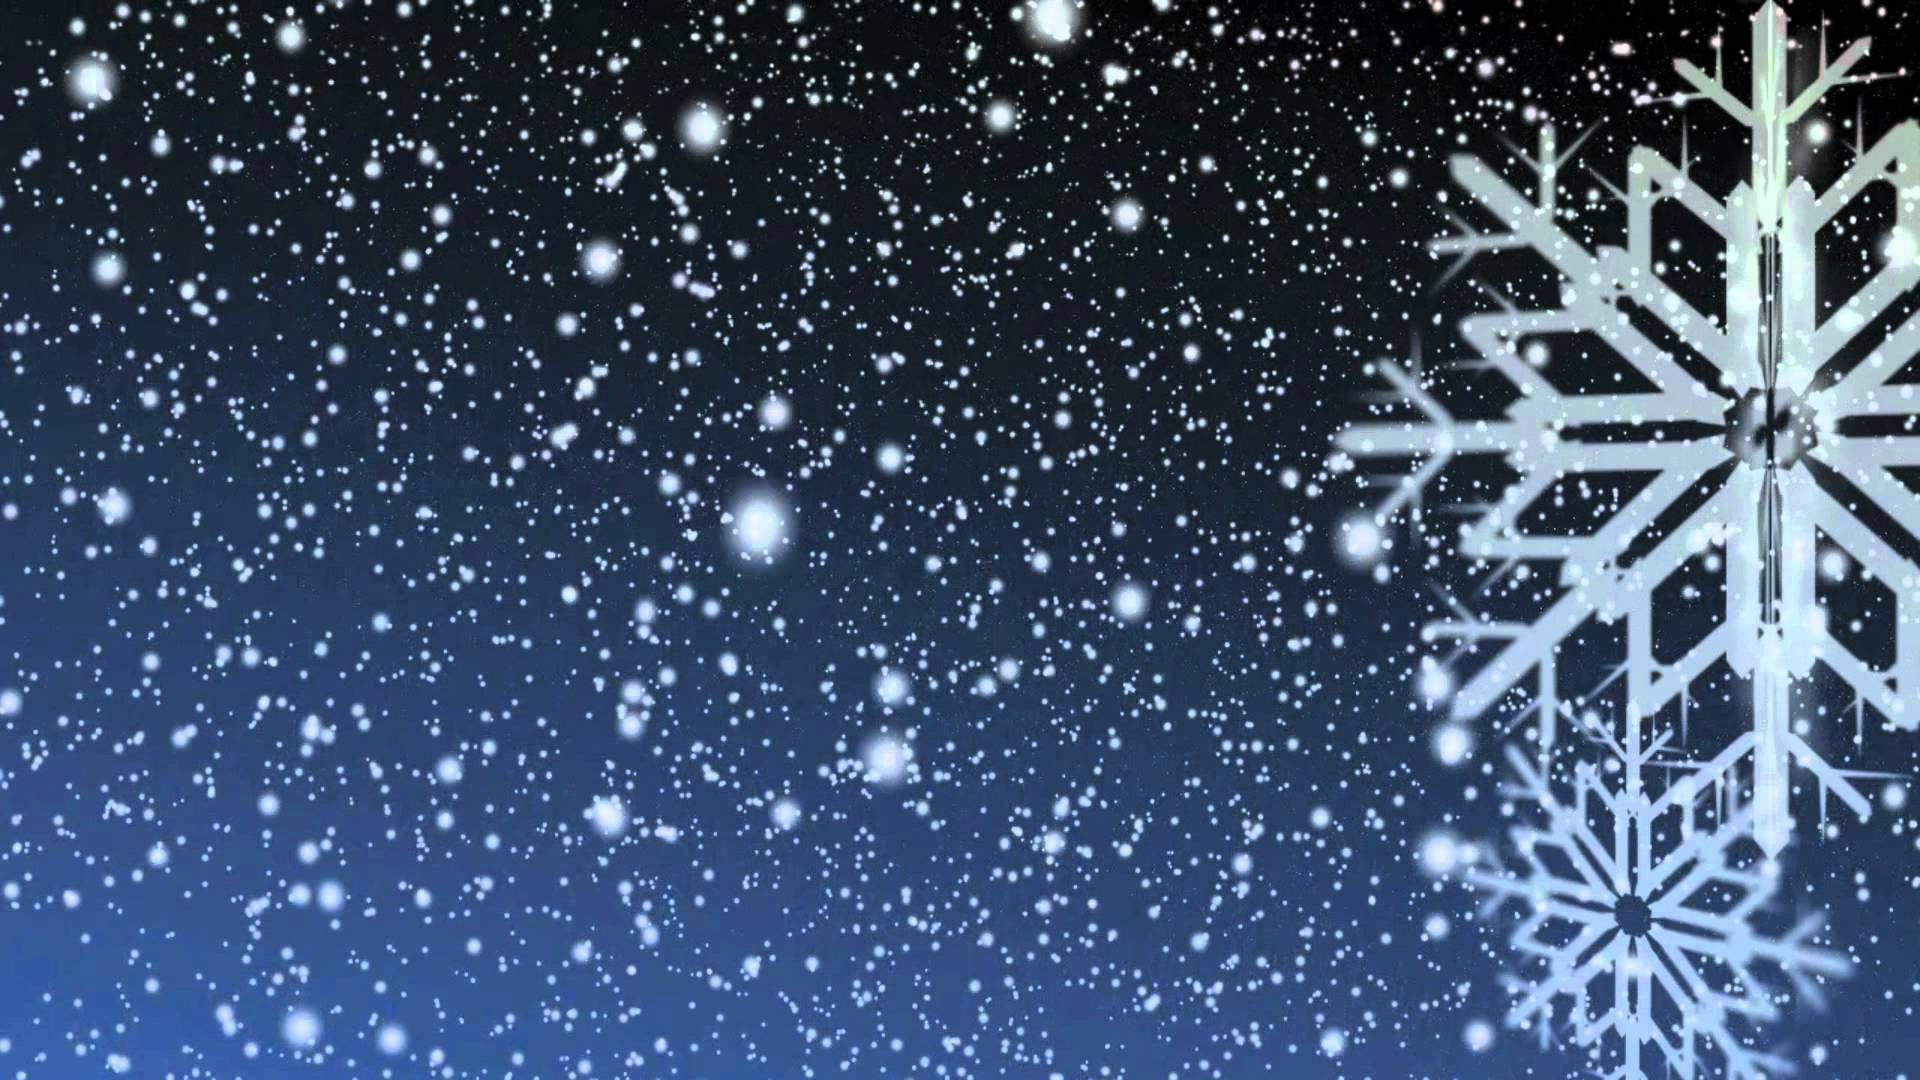 1920x1080 Falling Snow Wallpapers Top Free Falling Snow Backgrounds